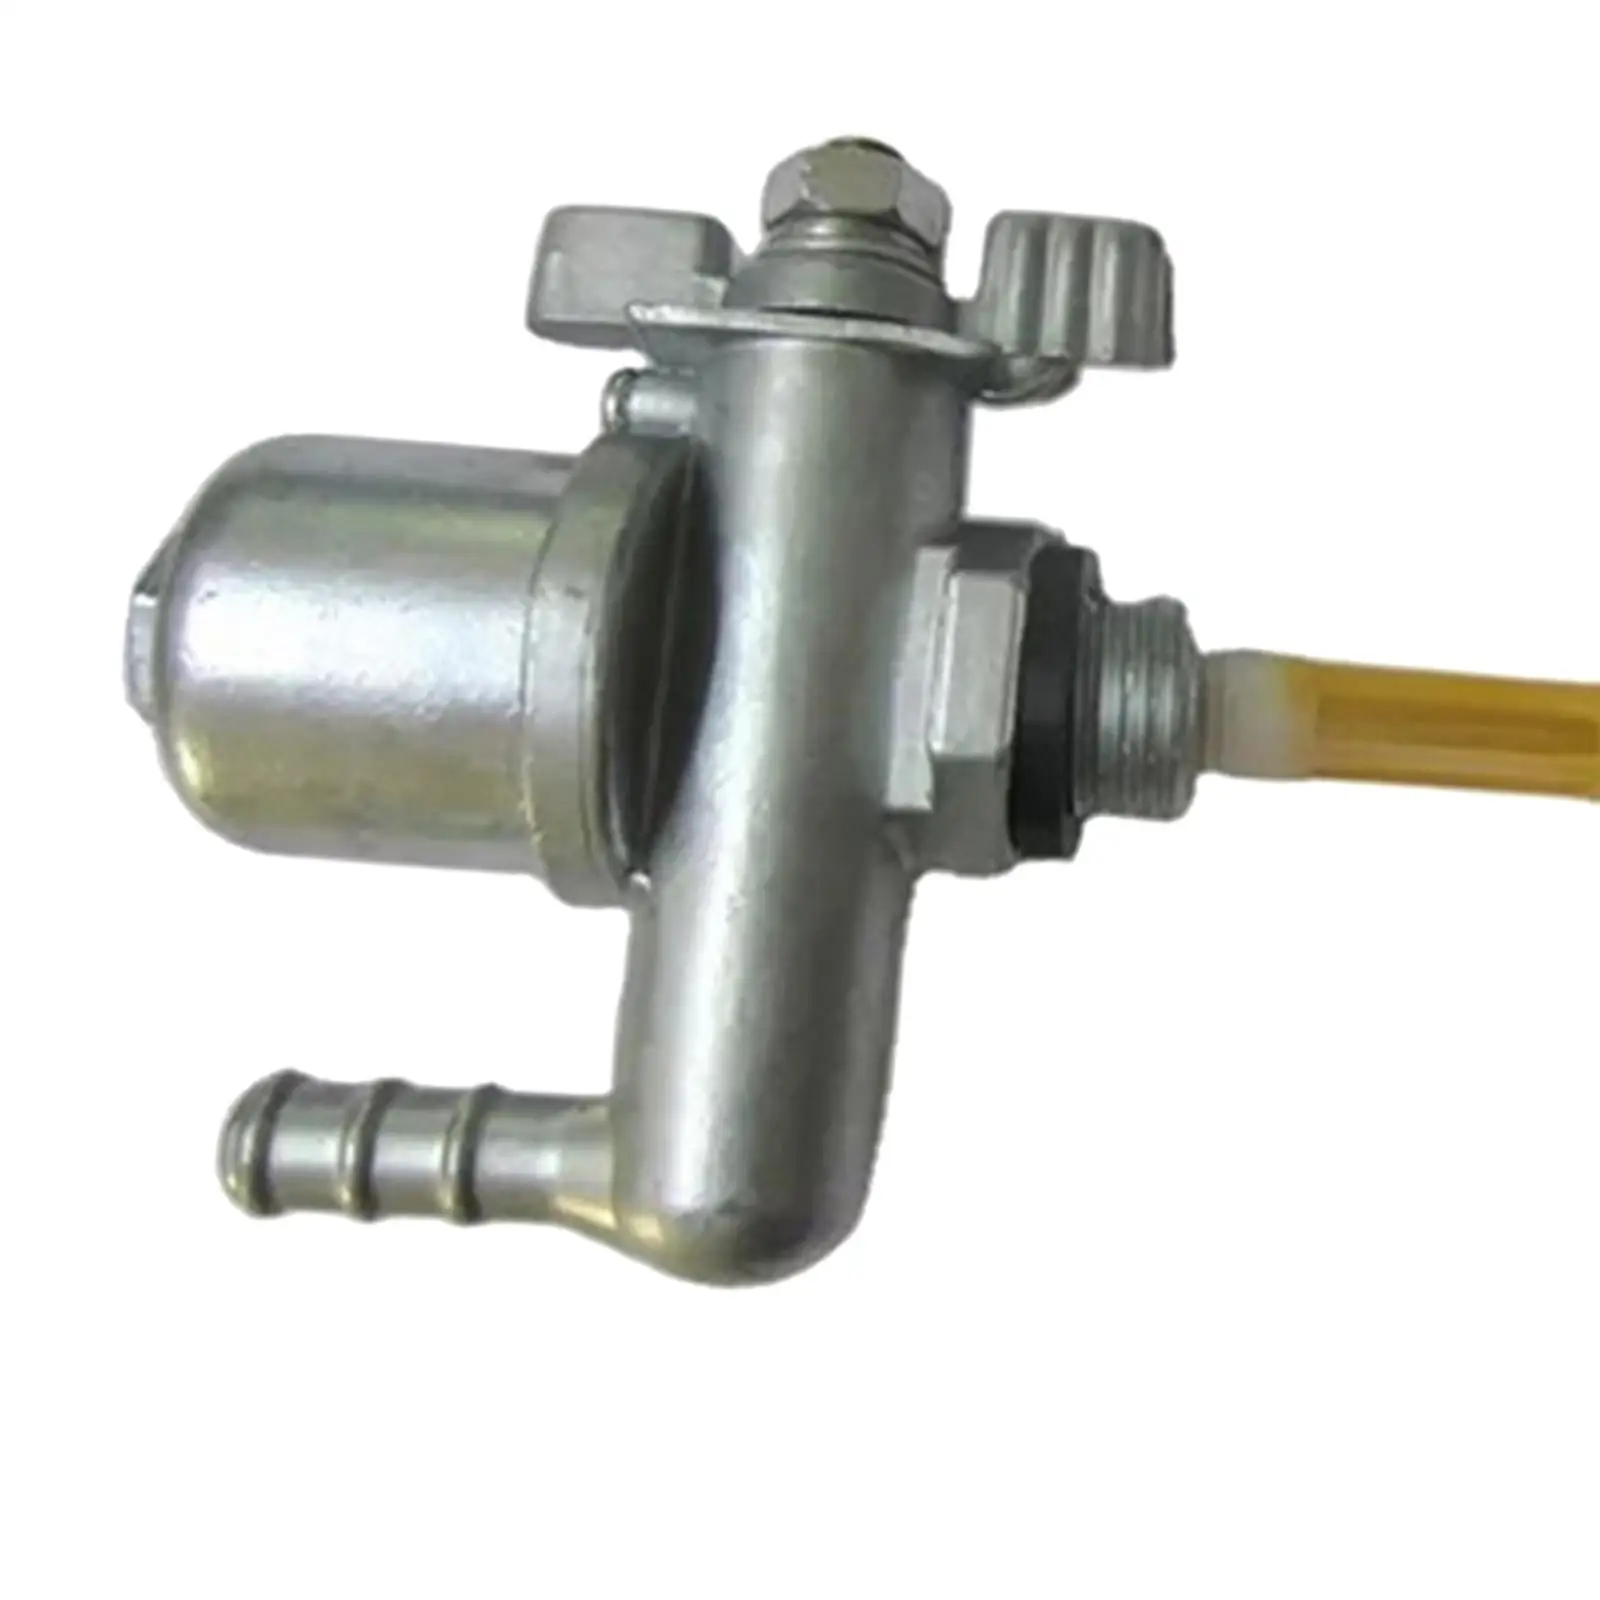 Fuel Gas Petcock Valve Switch Replace for Ruassia Msk Durable Supplies